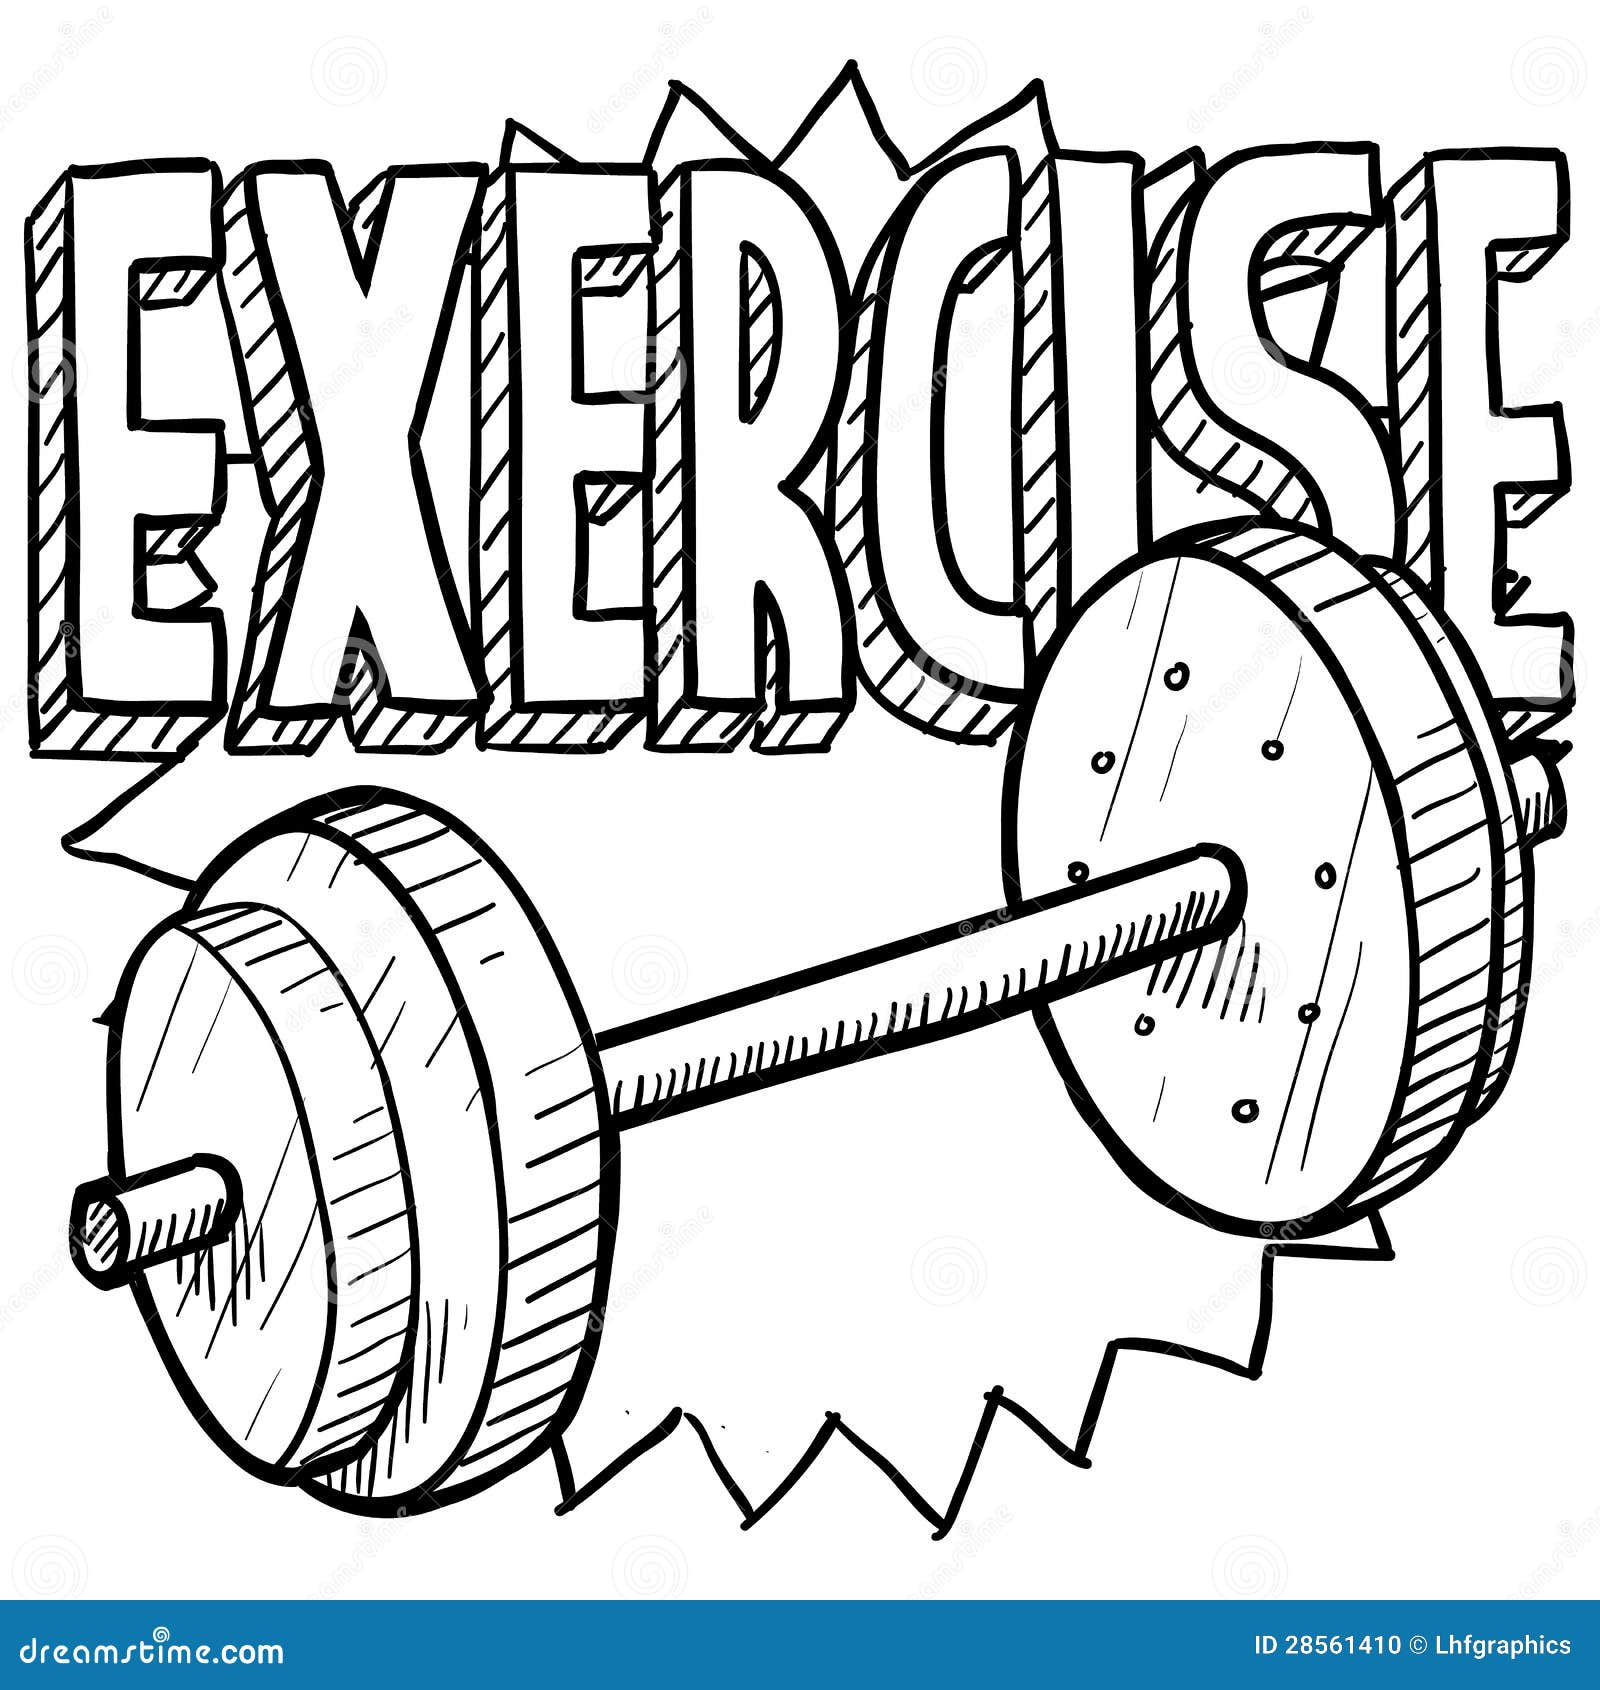 Weightlifting sketch stock vector. Image of muscles, athletic - 28561410